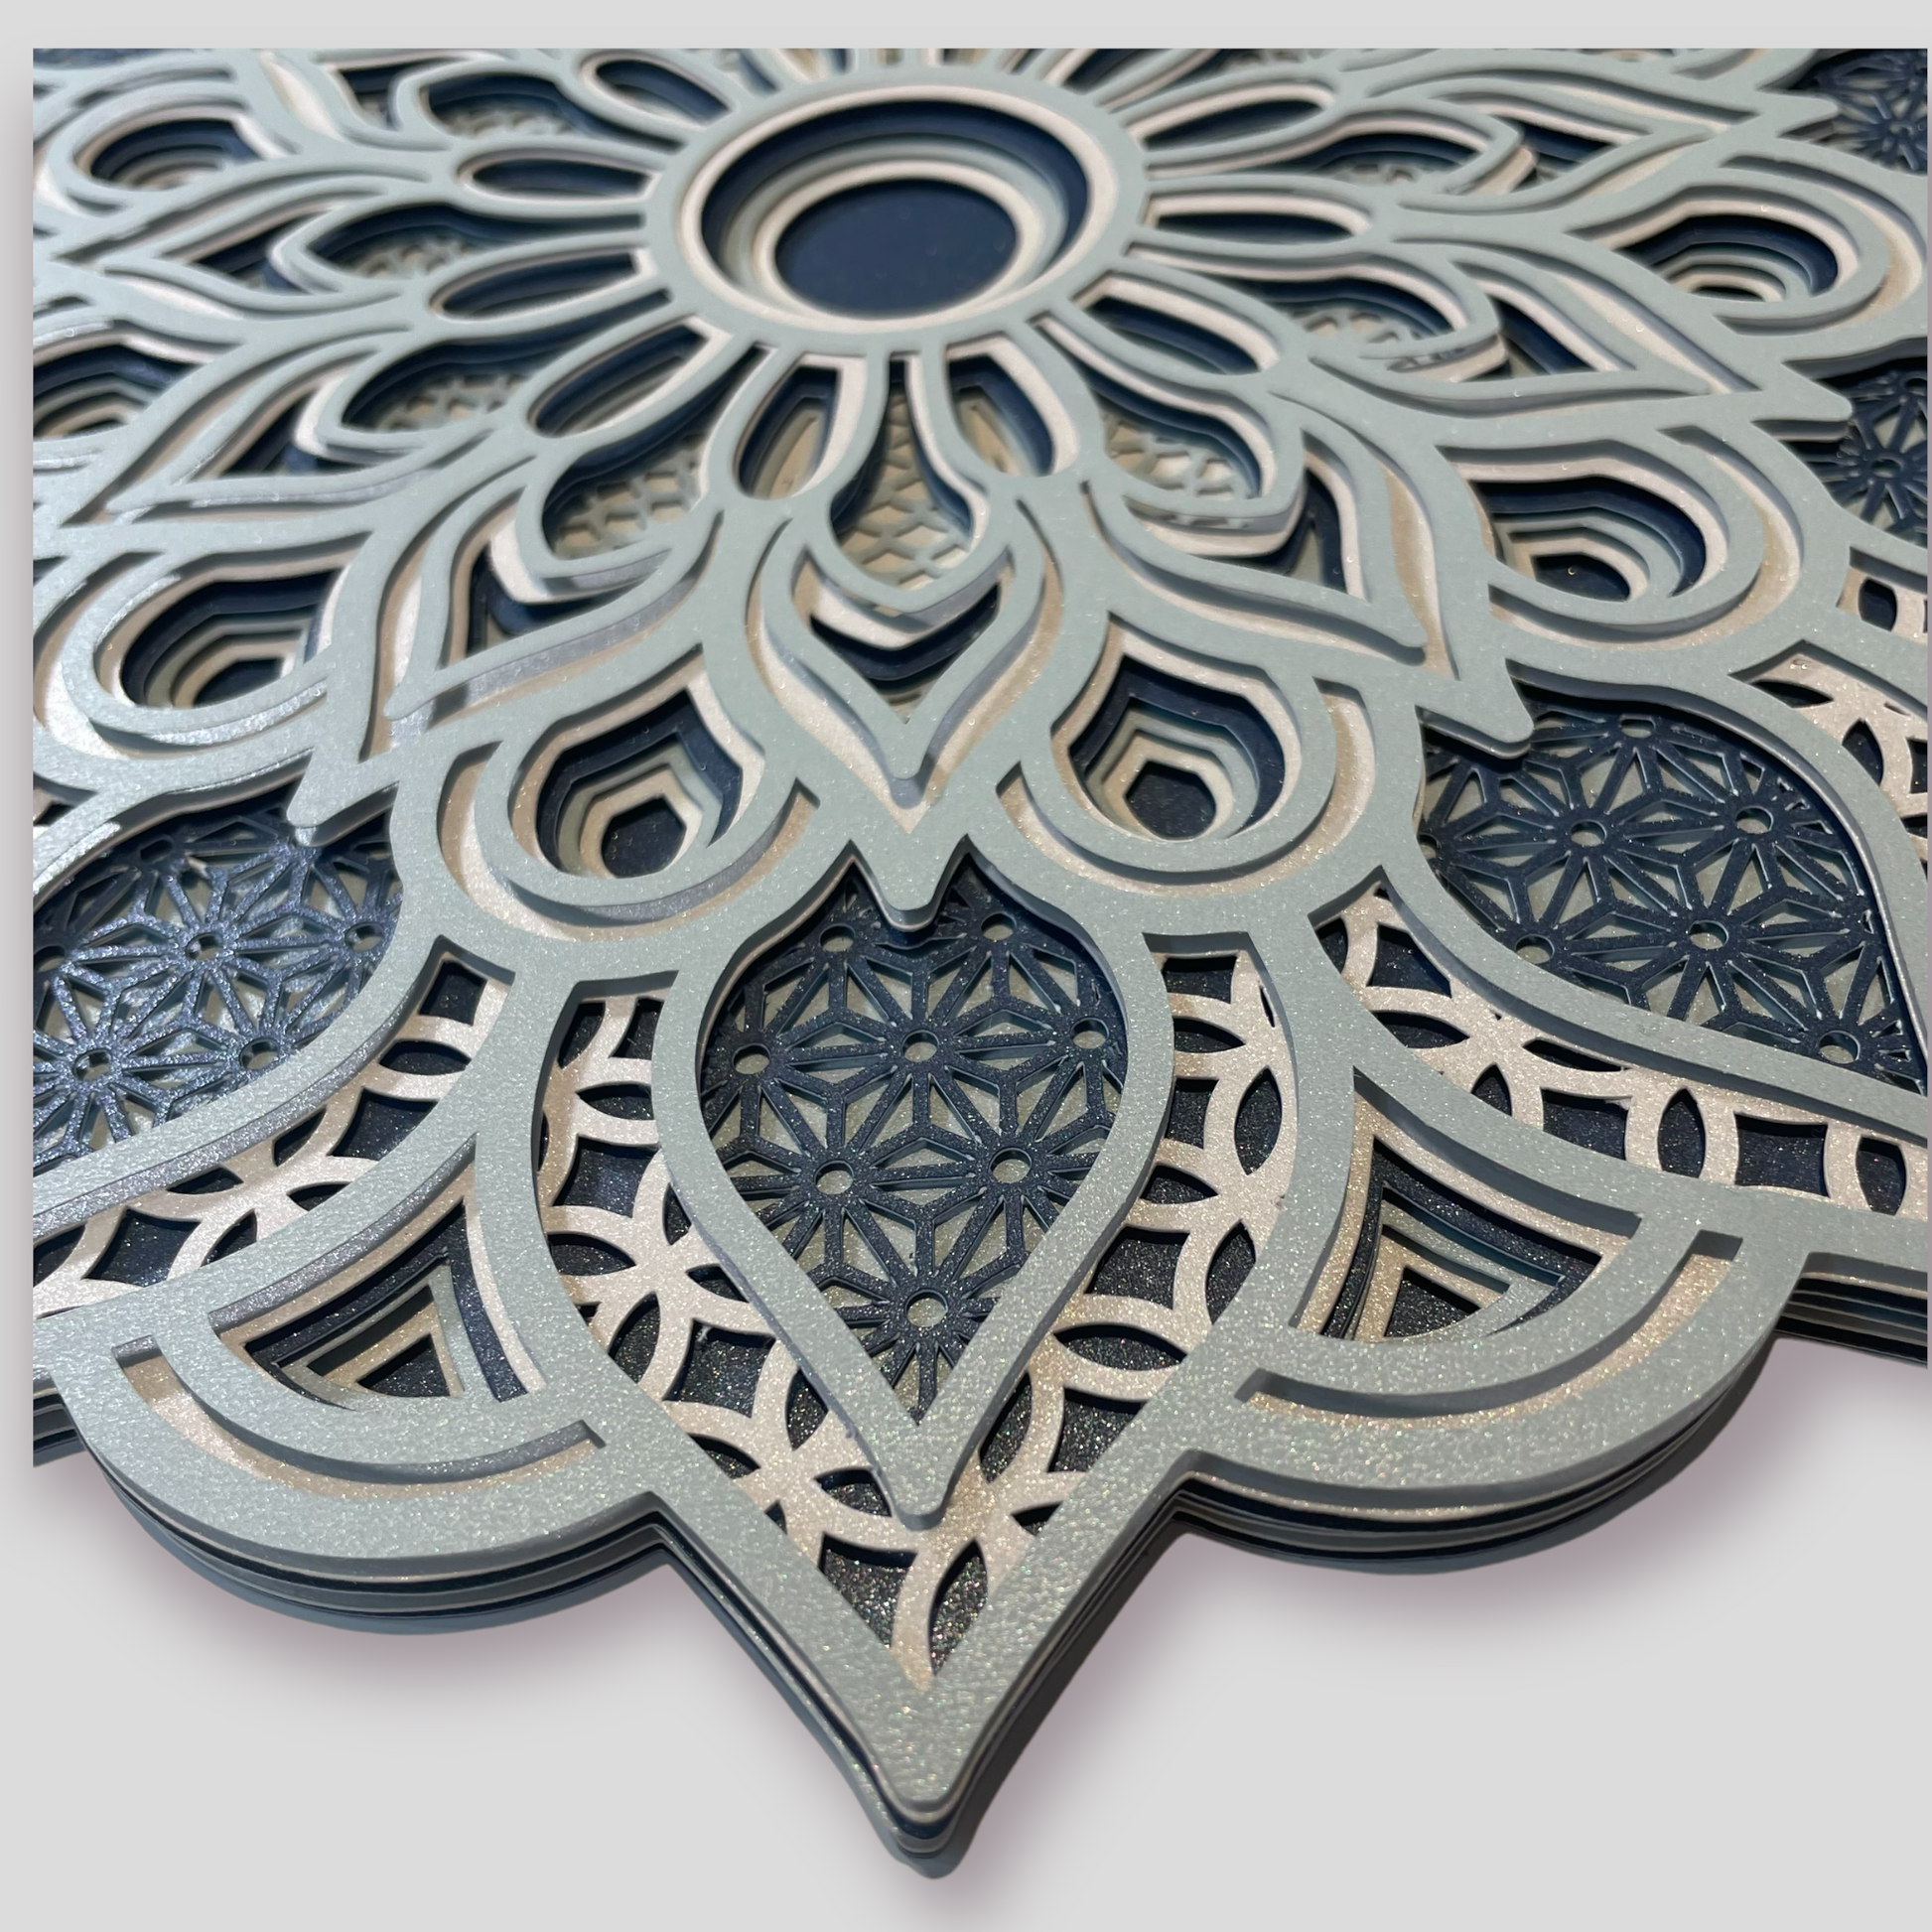 Paper craft 3d layered Mandala instant download design by Home Stitchery Decor. 